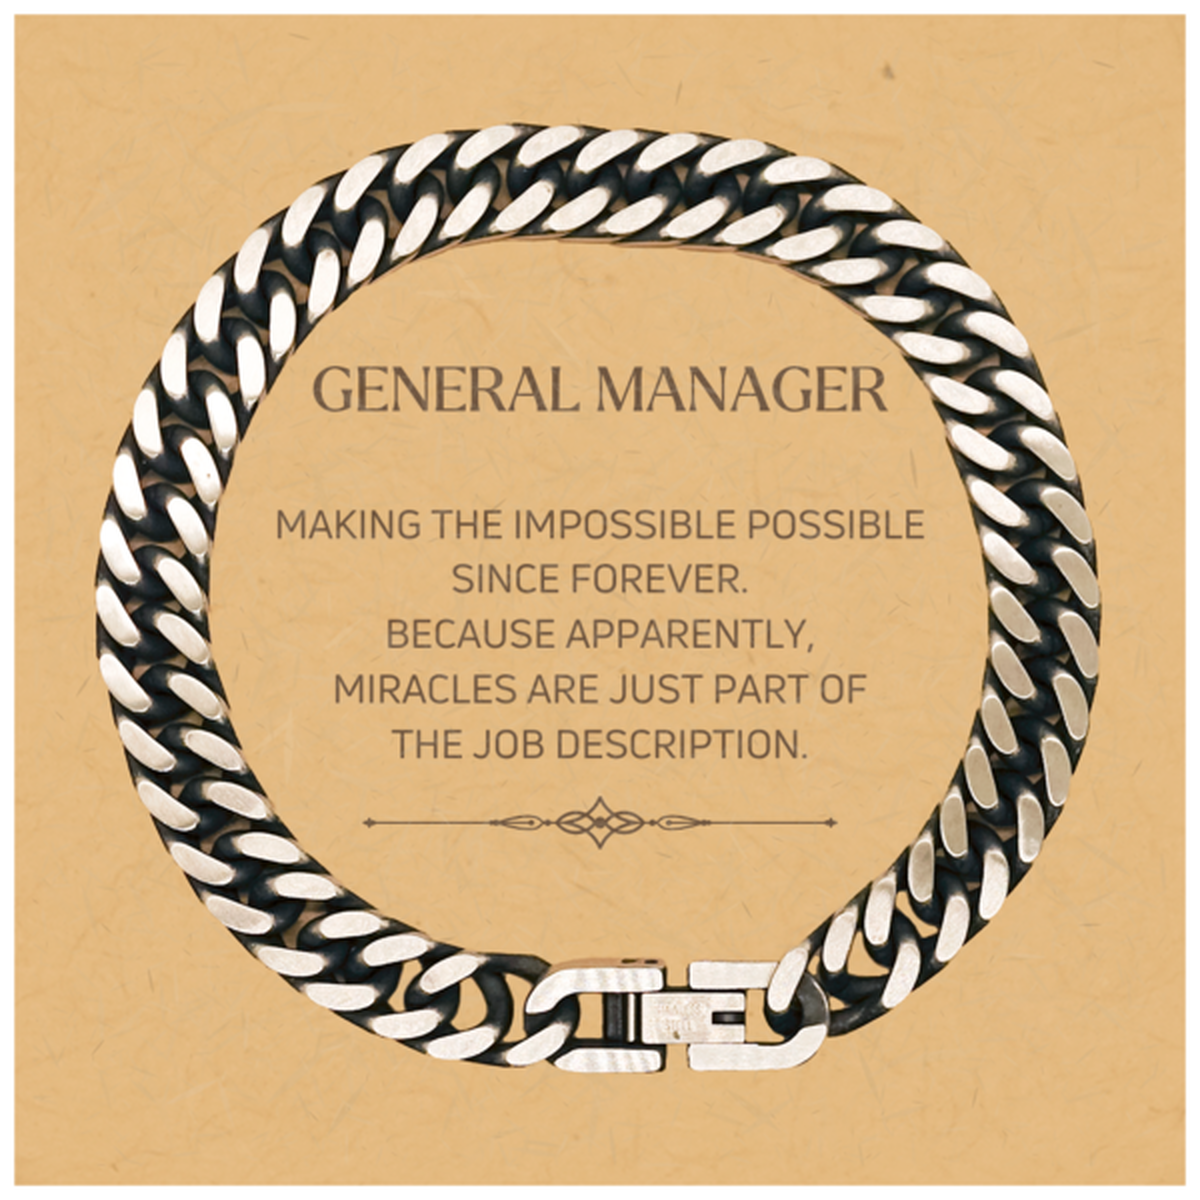 Funny General Manager Gifts, Miracles are just part of the job description, Inspirational Birthday Christmas Cuban Link Chain Bracelet For General Manager, Men, Women, Coworkers, Friends, Boss